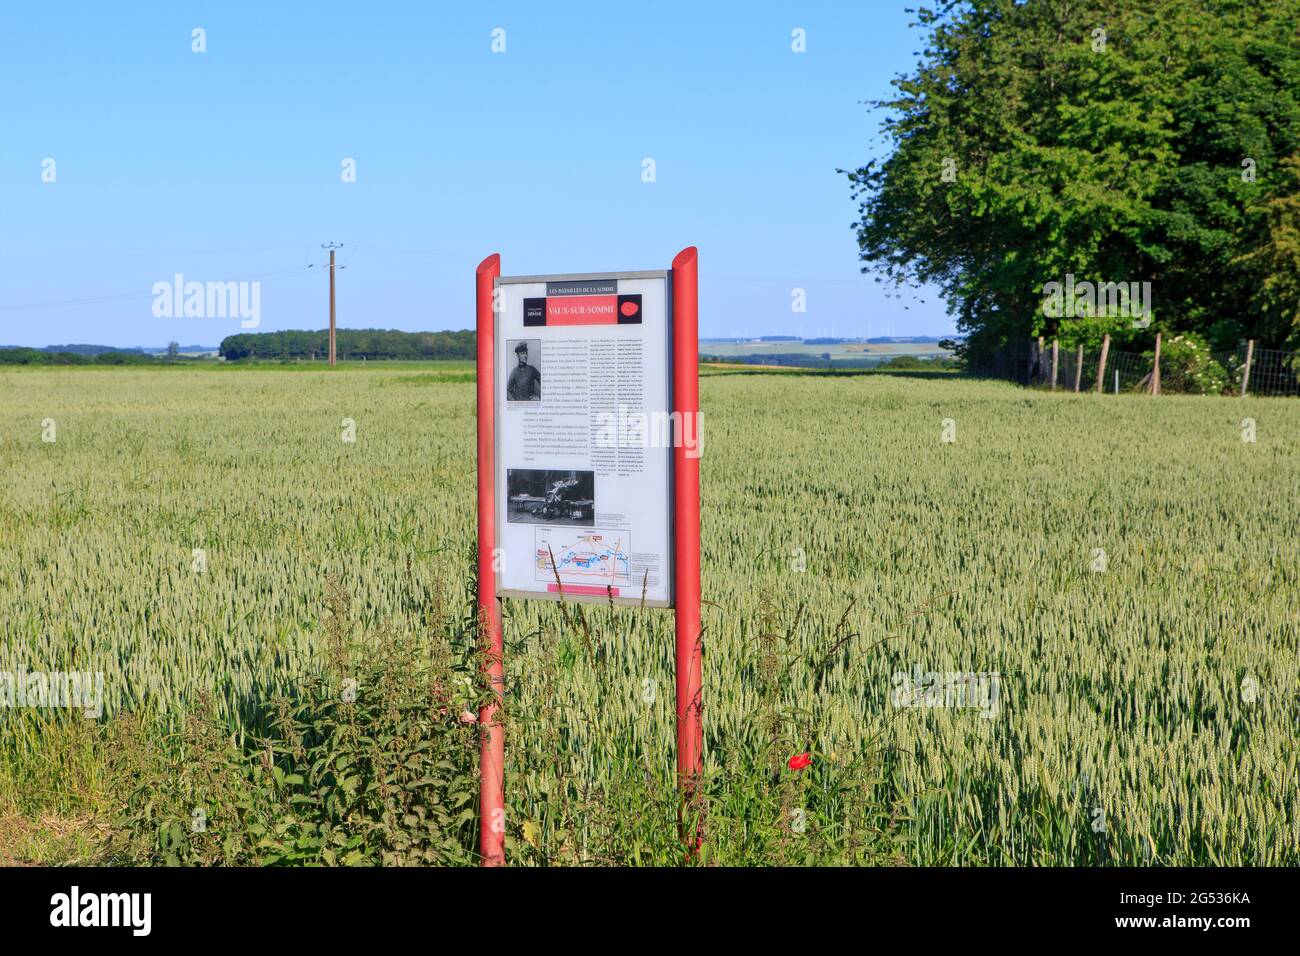 Crash site of the German (Prussian) World War I ace-of-aces captain Manfred von Richthofen (aka Red Baron) in Vaux-sur-Somme (Somme), France Stock Photo